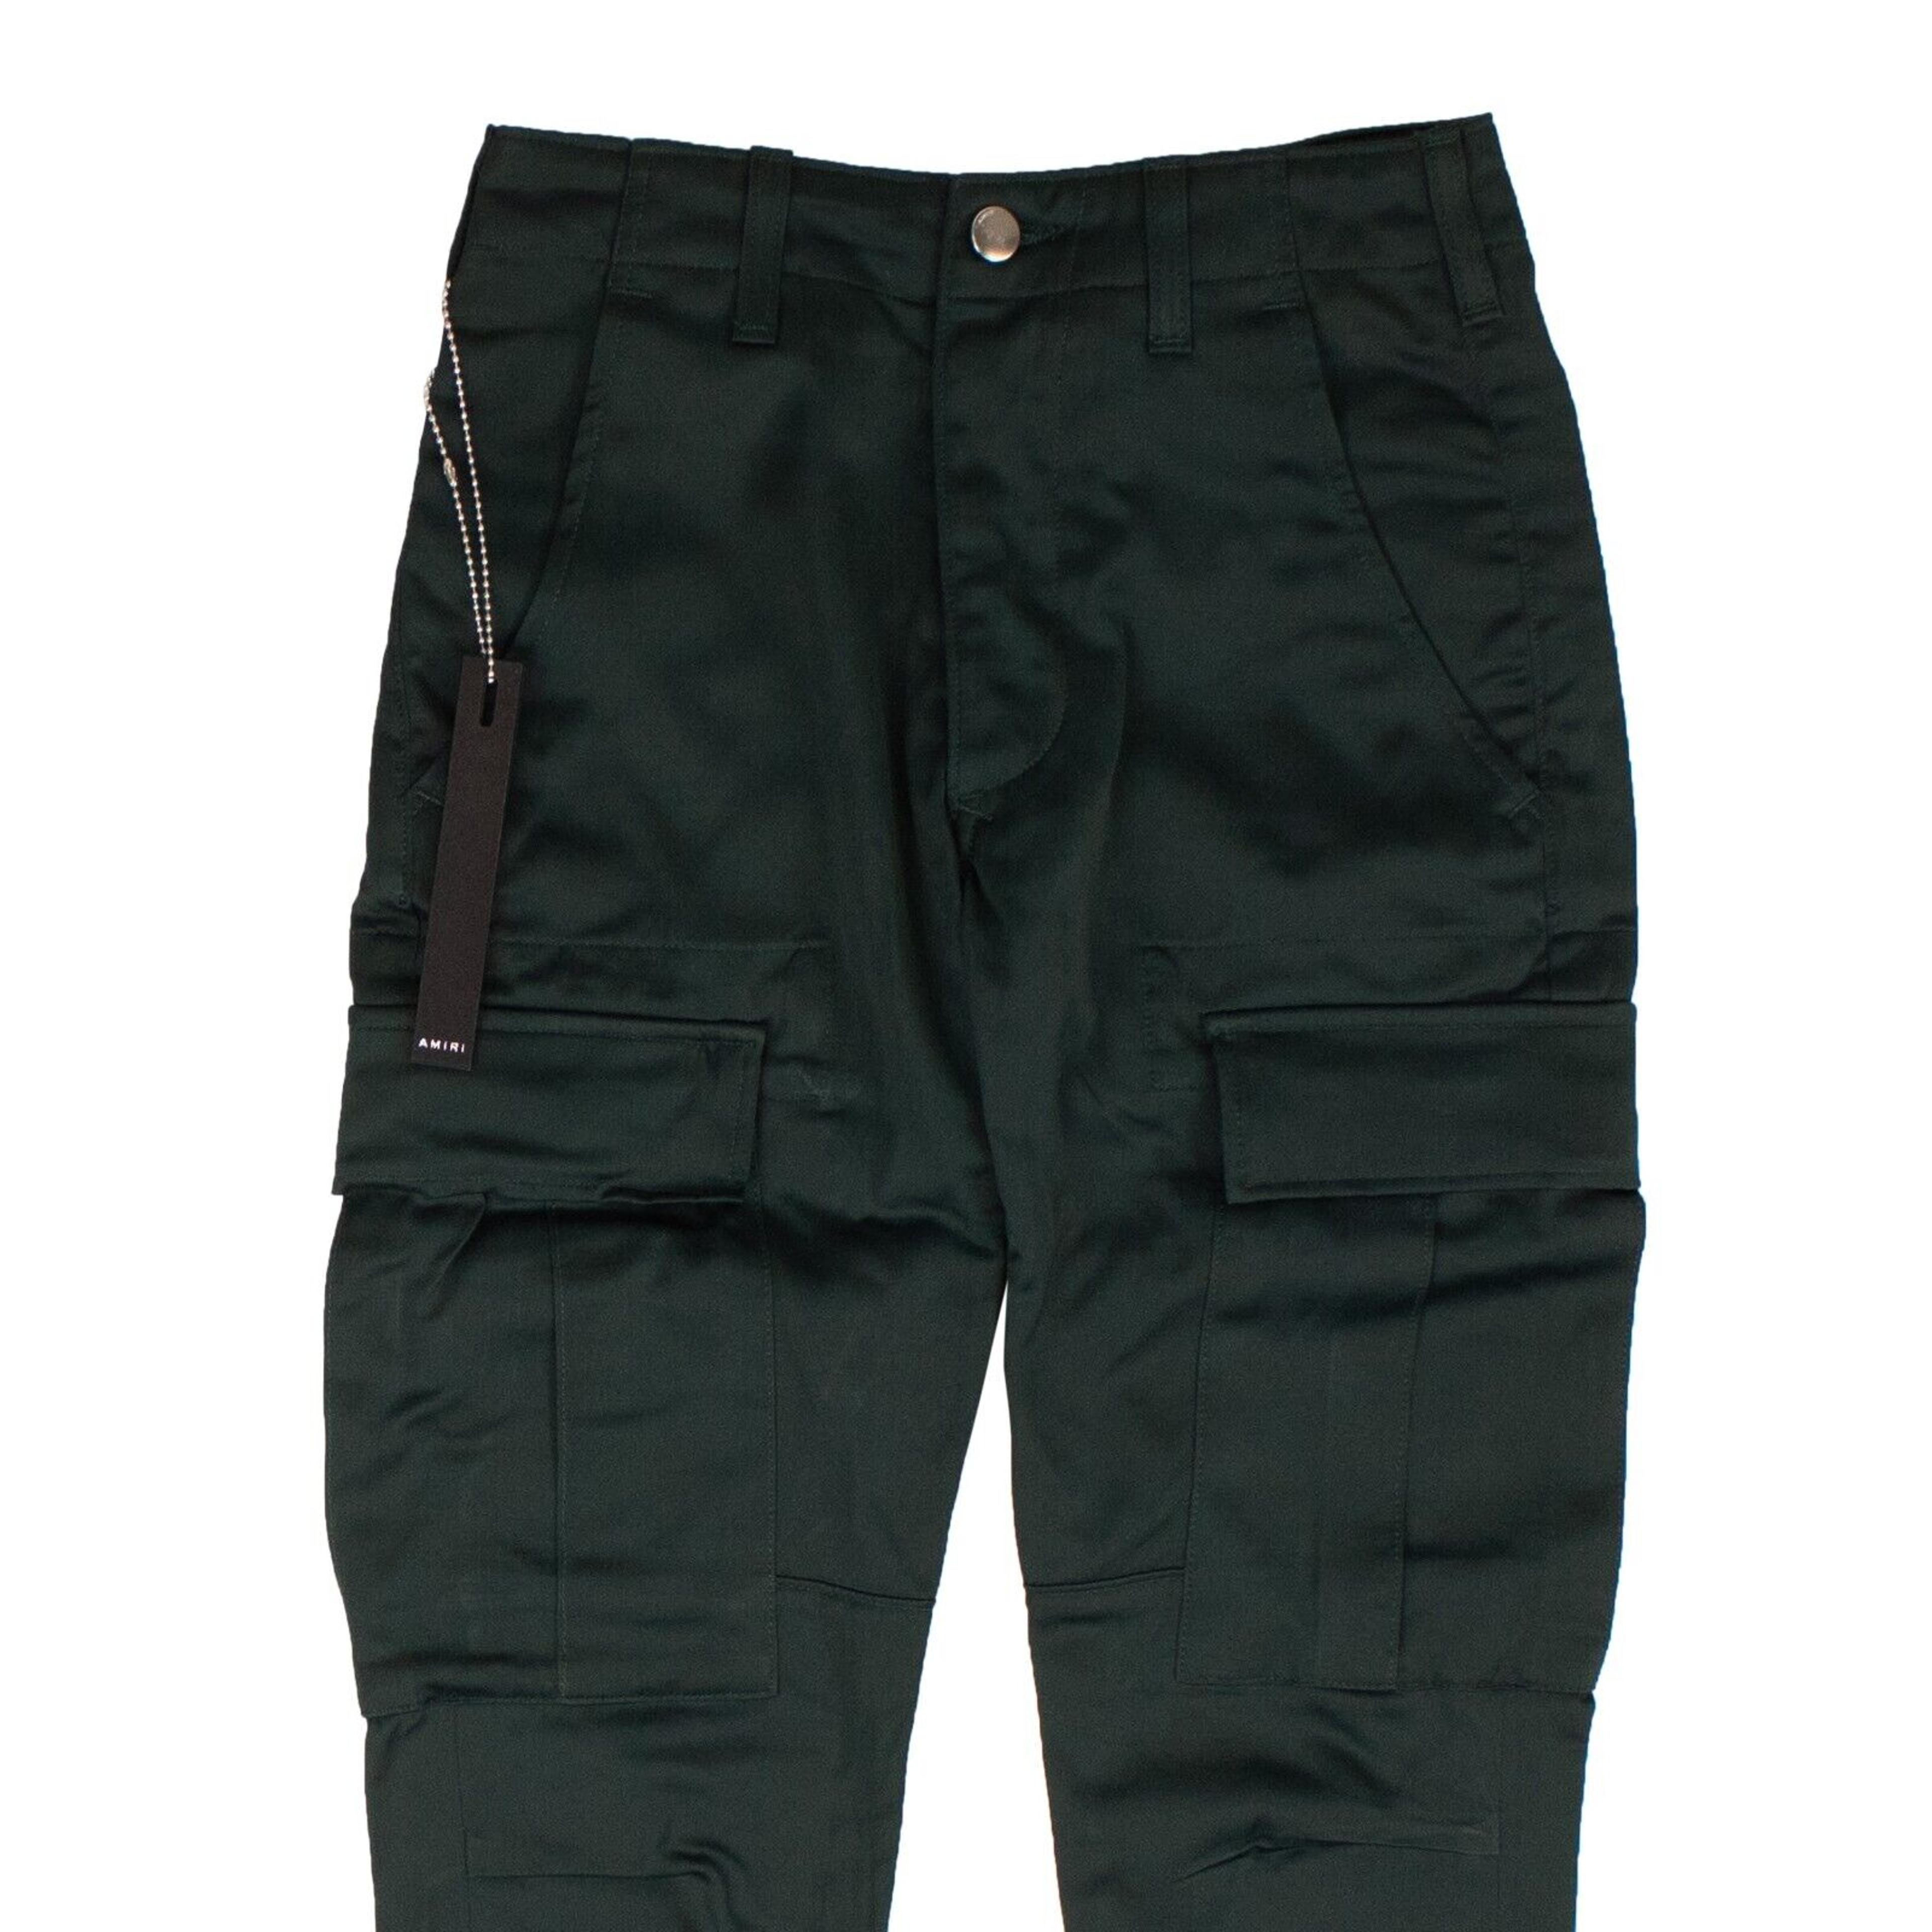 Alternate View 1 of Green Solid Cargo Pants